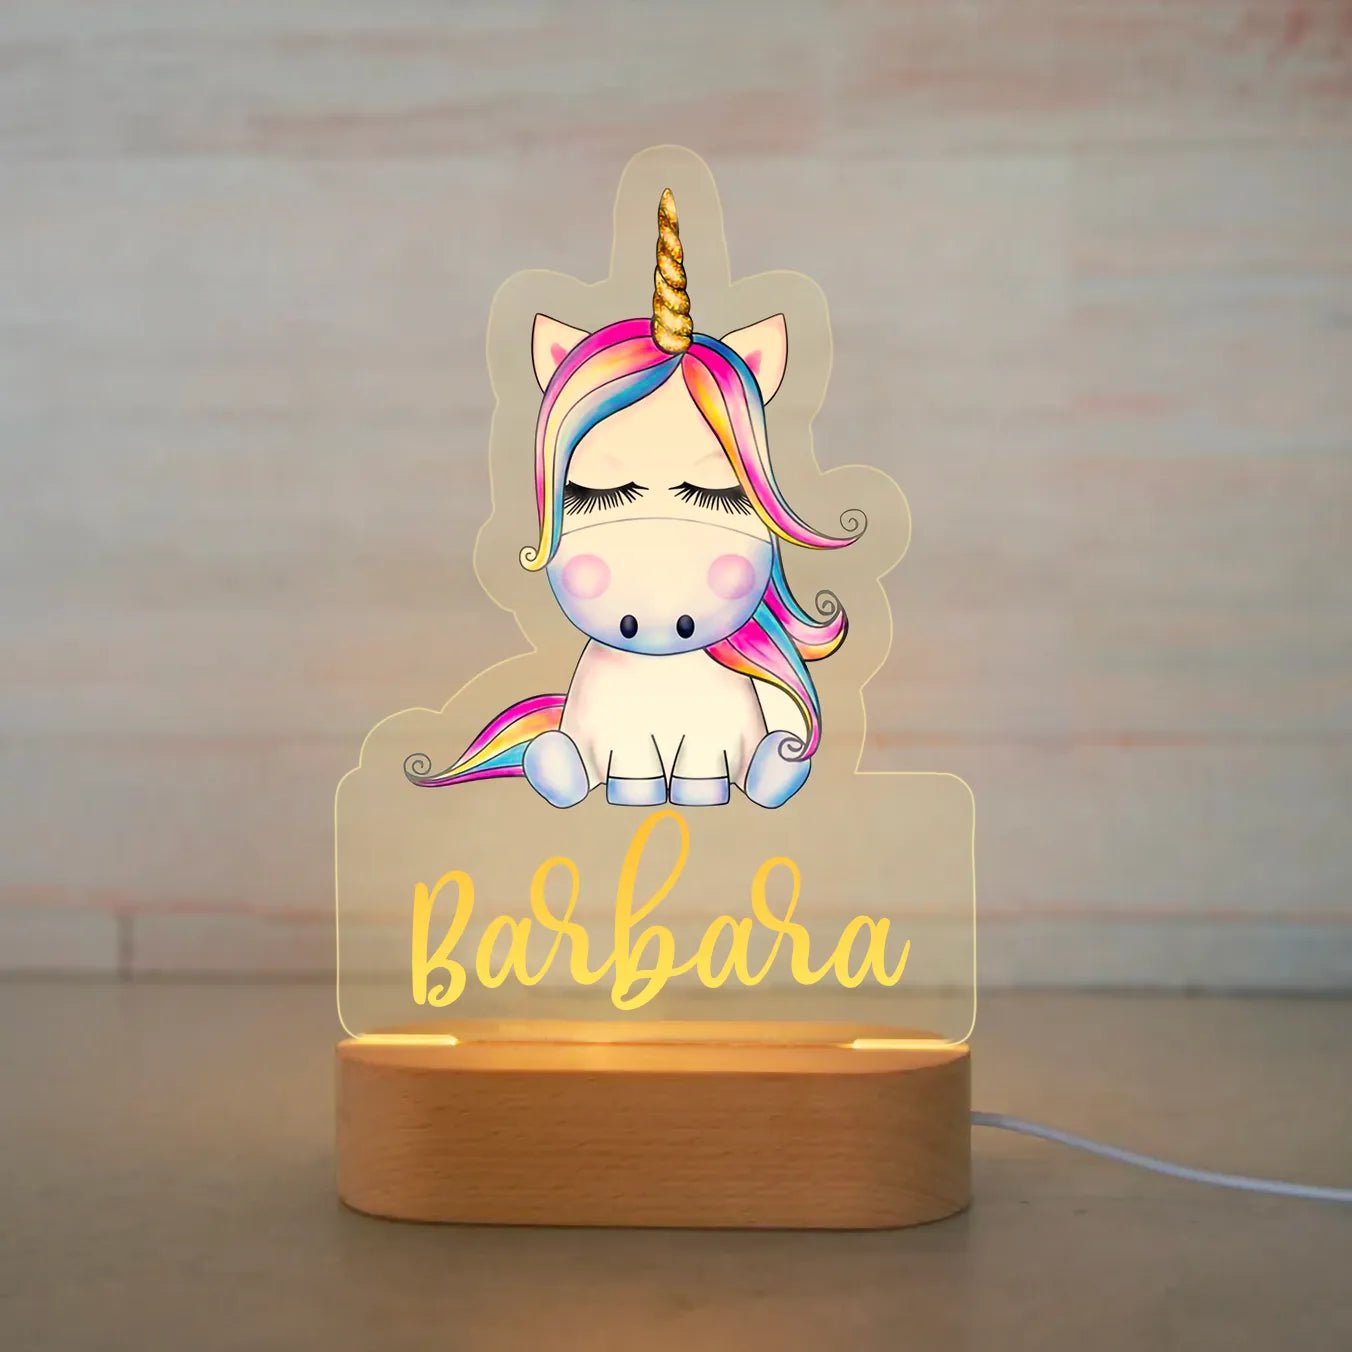 Customized Animal-themed Night Light for Kids - Personalized with Child's Name, Acrylic Lamp for Bedroom Decor Warm Light / 32 Unicorn